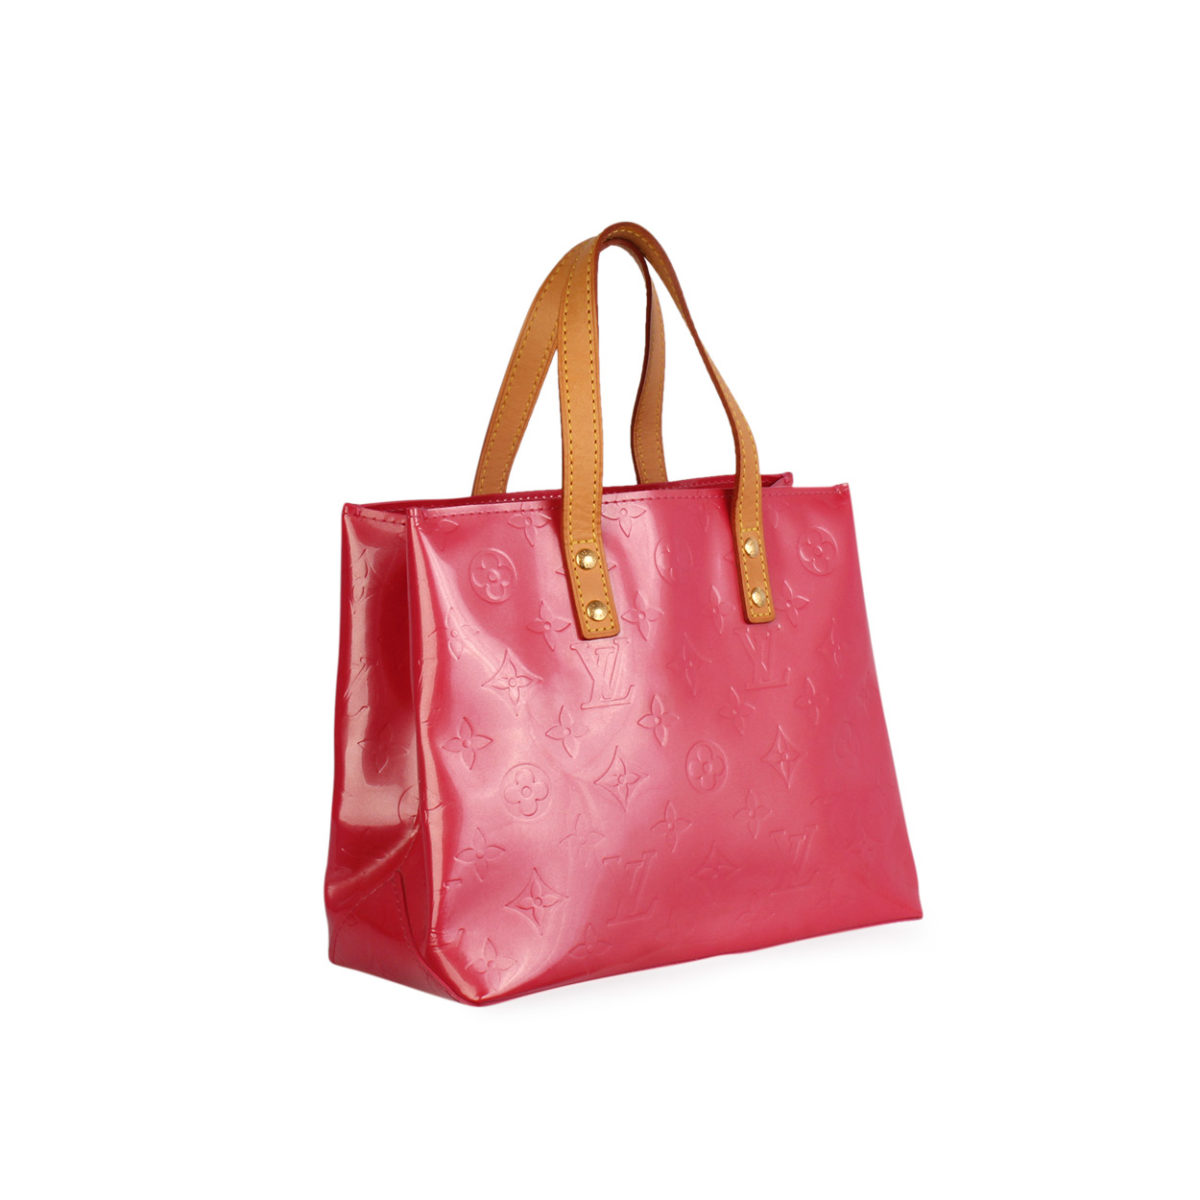 LOUIS VUITTON Vernis Reade Tote PM Framboise | Luxity